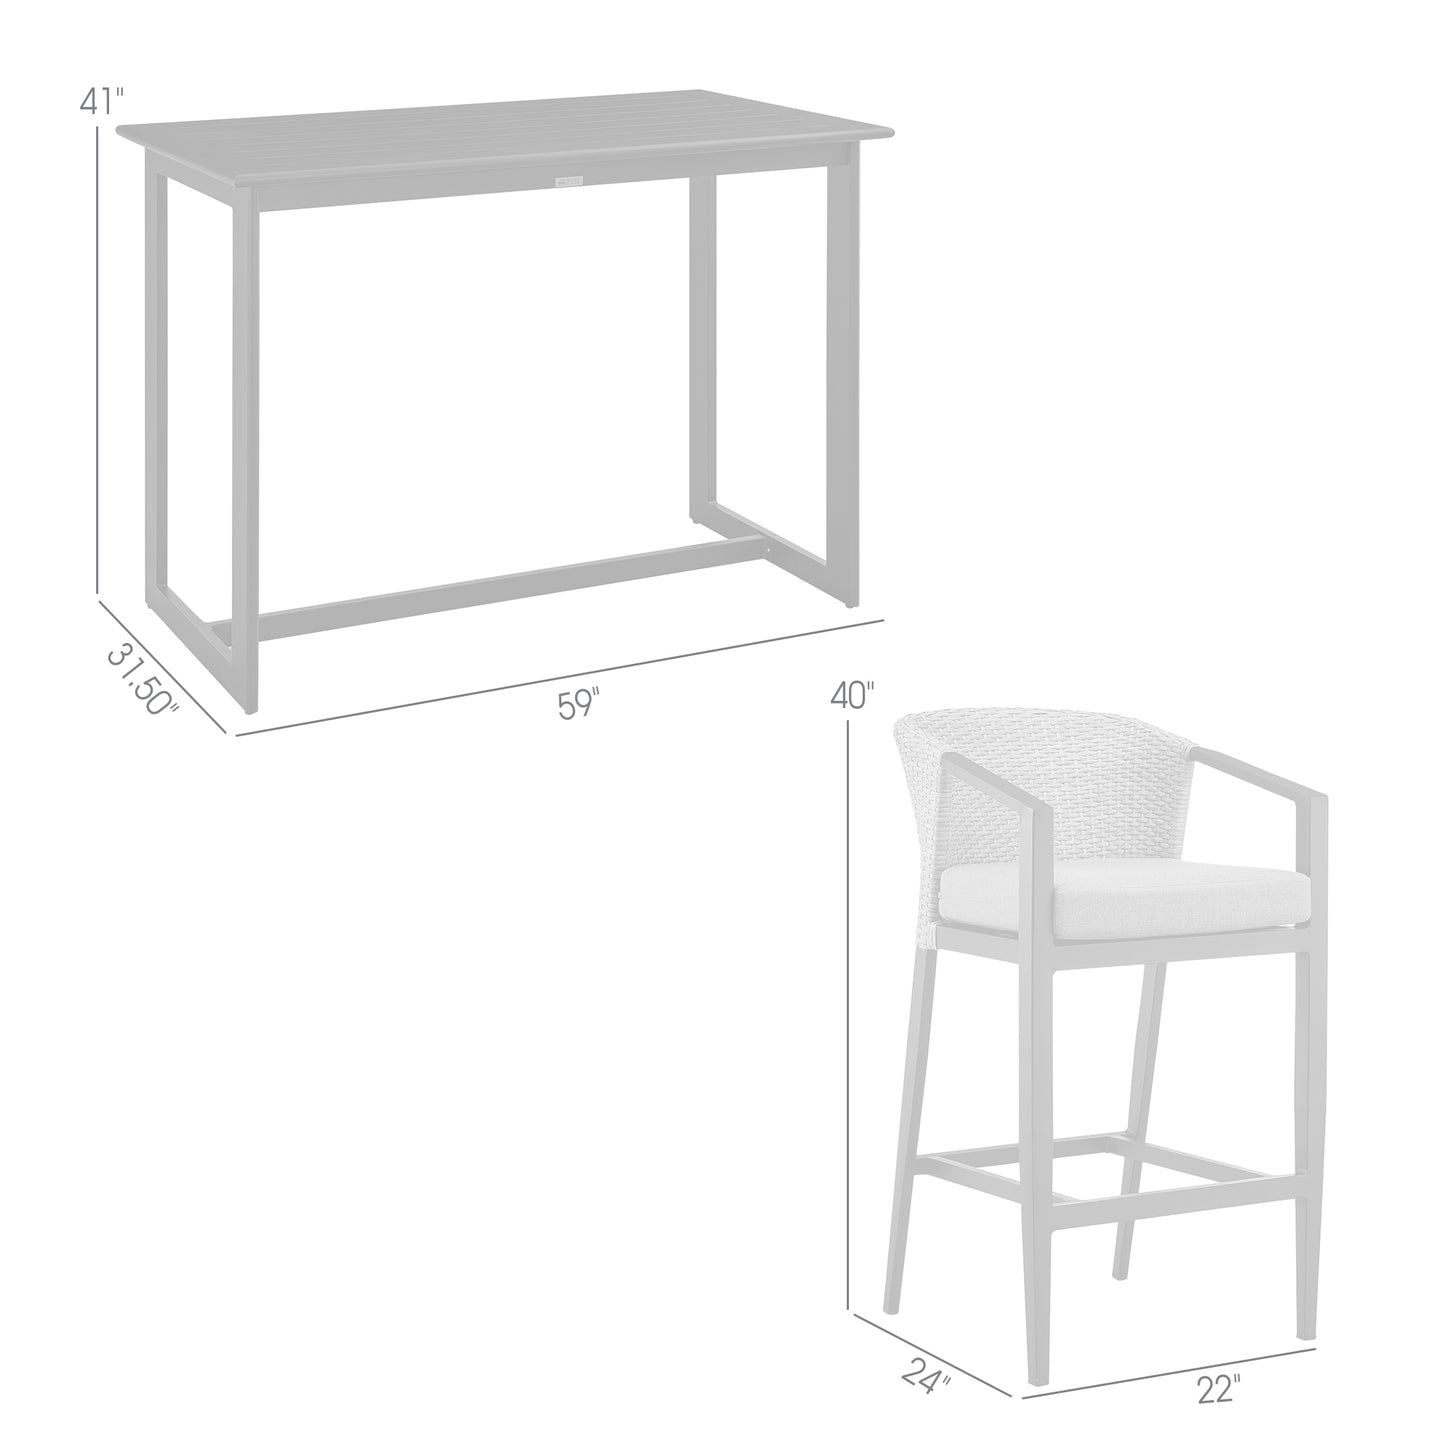 Aileen Outdoor Patio 5-Piece Bar Table Set in Aluminum with Gray Cushions